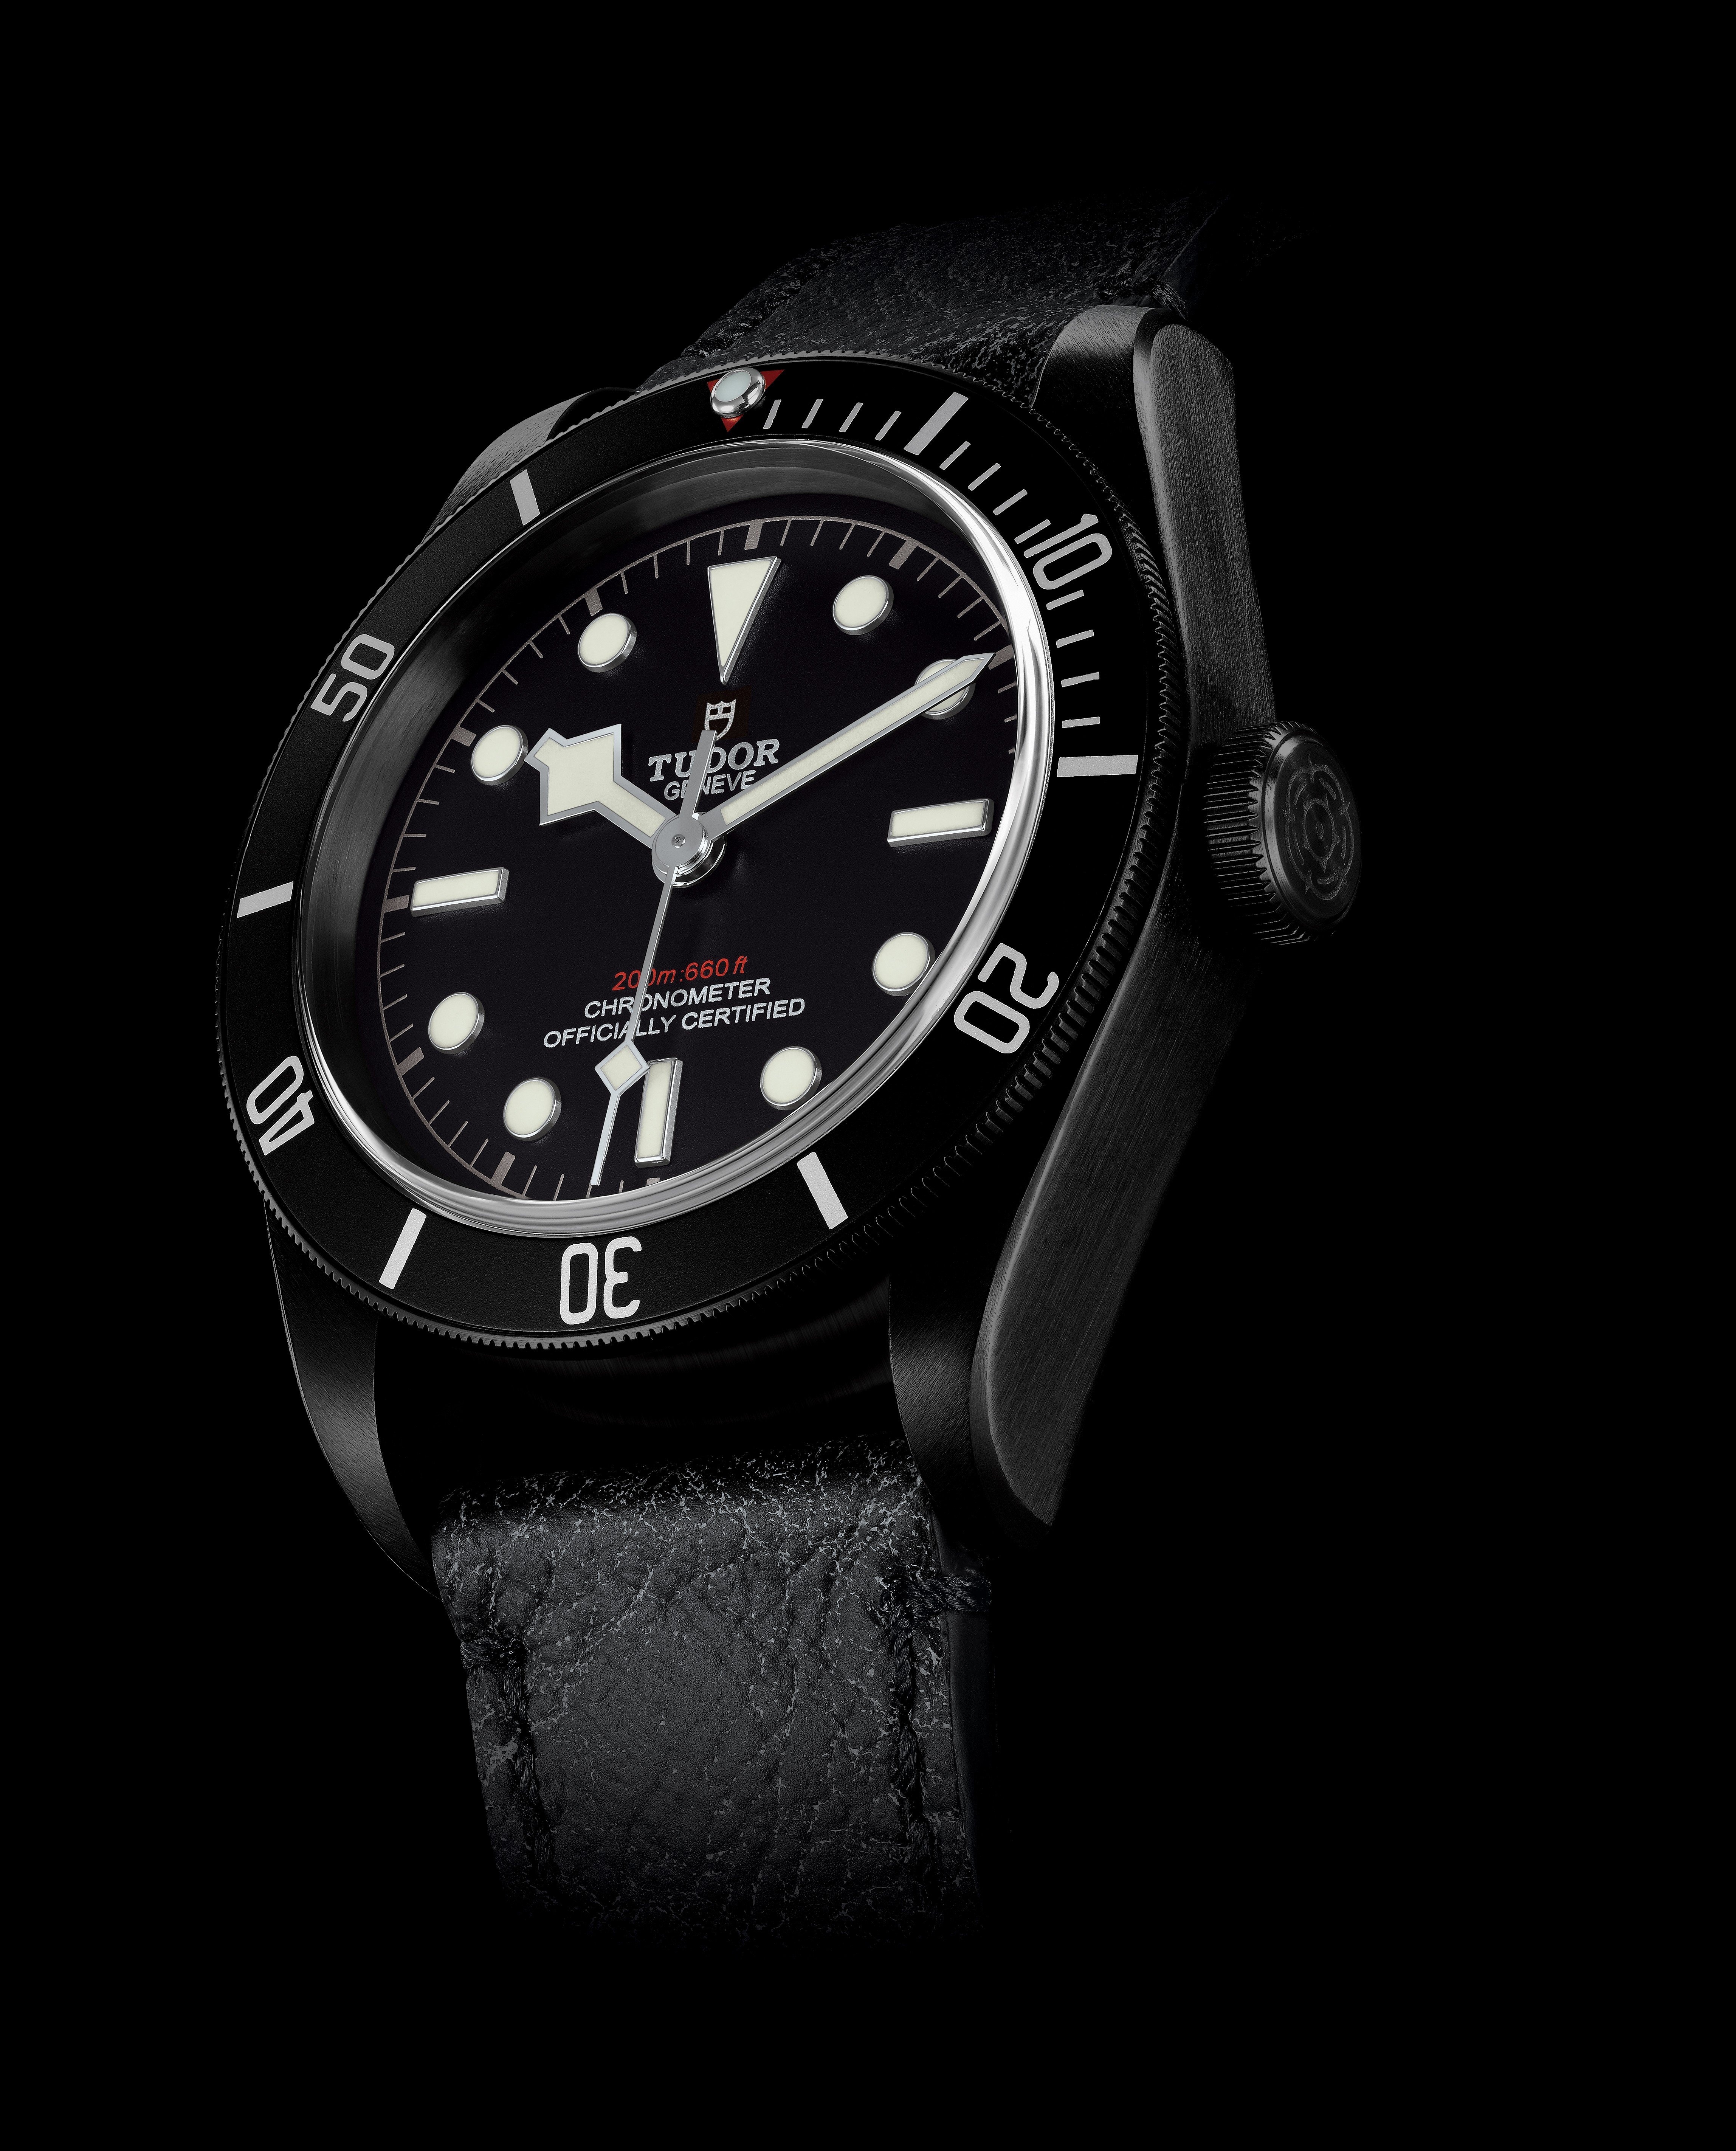 The Rolex Sea-Dweller, Audemars Piguet’s Royal Oak Offshore Diver and Tudor Heritage Black Bay Dark all hit the right notes